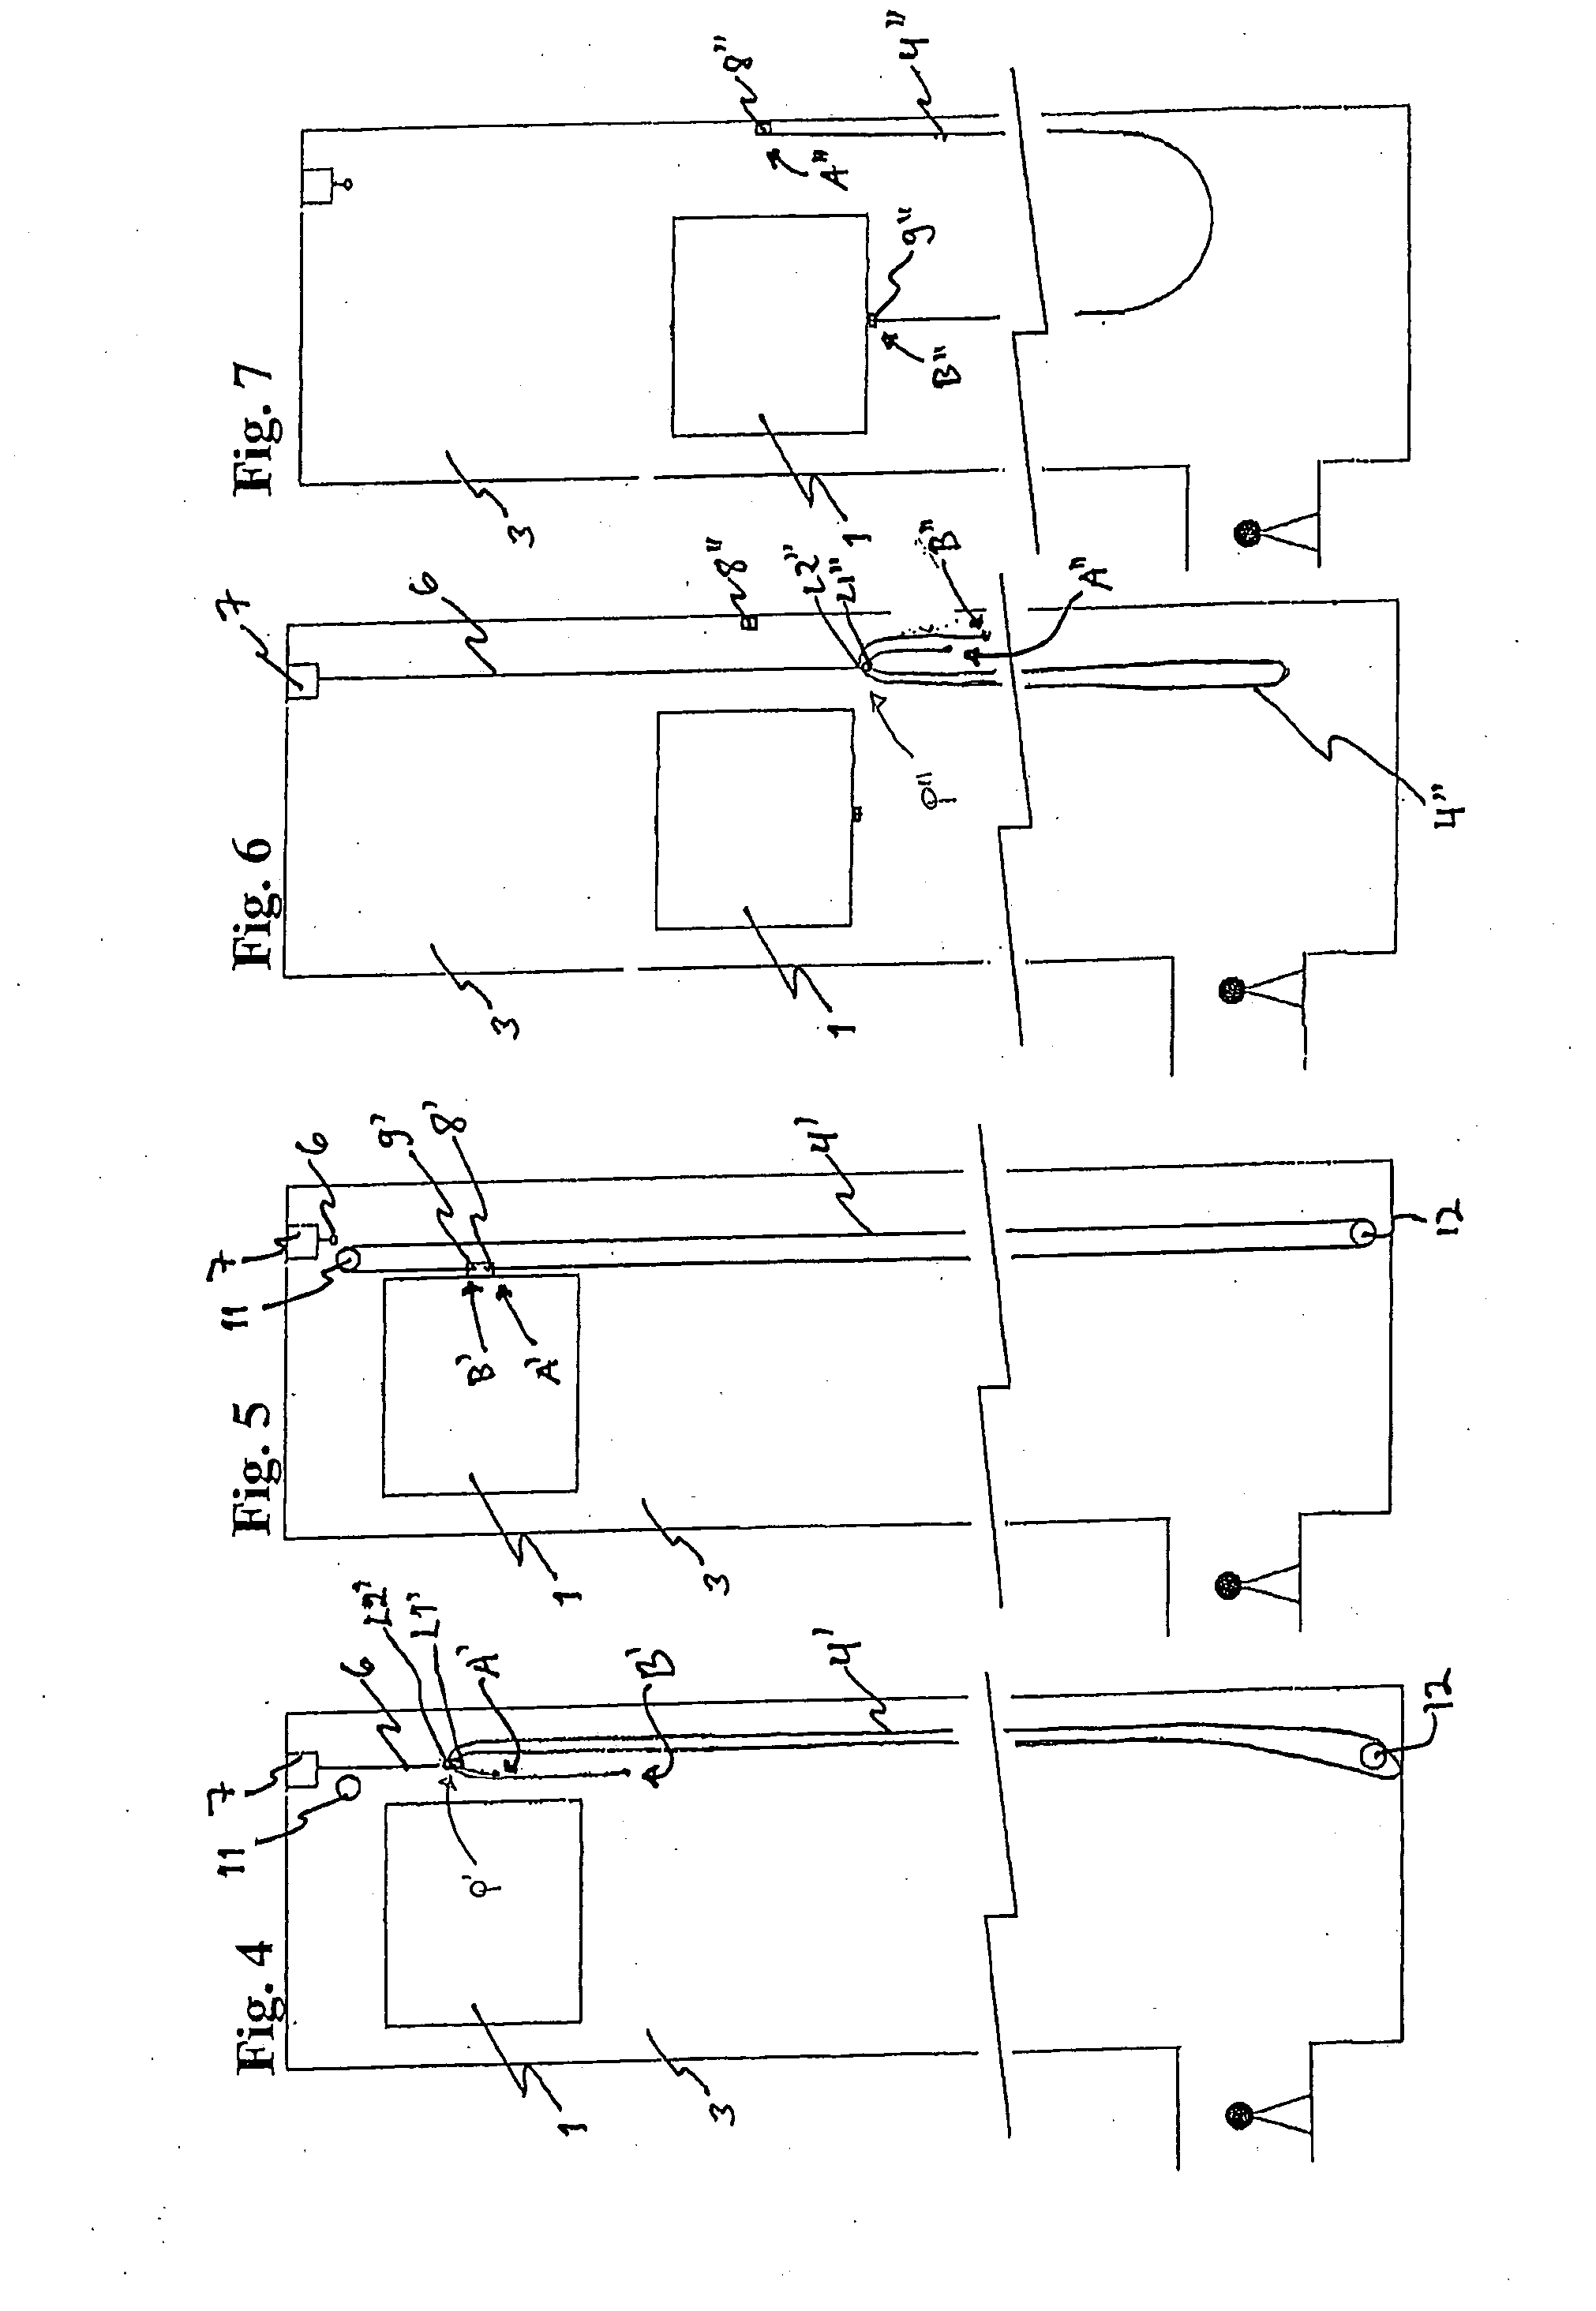 Method for reeving an elevator, rope reel and method for installing an overspeed governor rope or a trailing cable